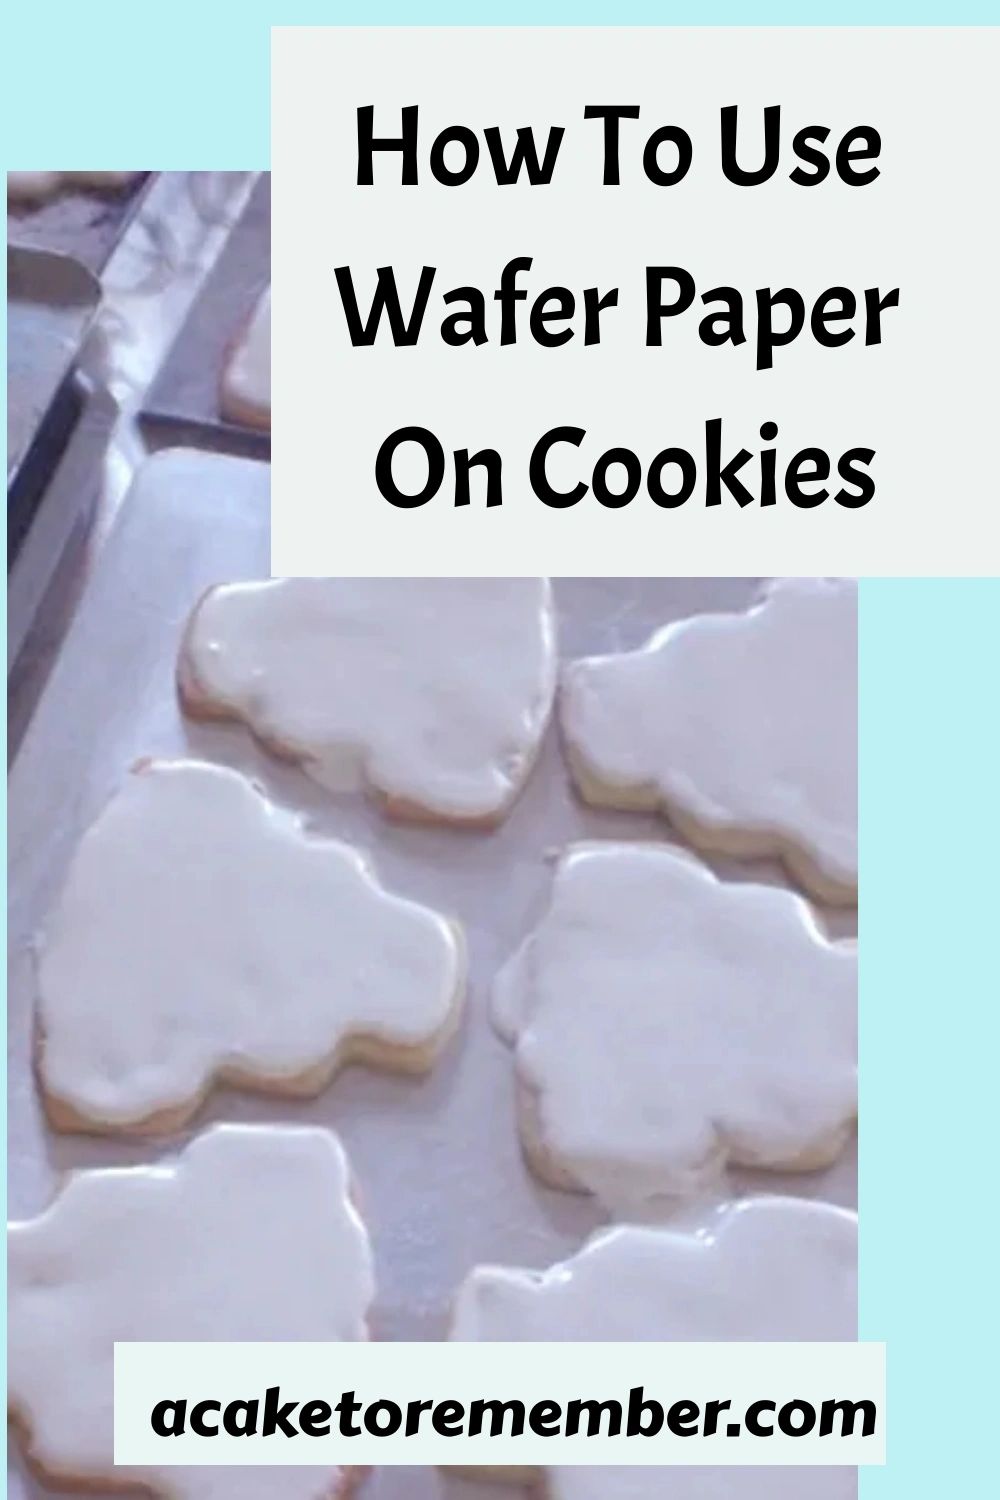 https://img1.wsimg.com/isteam/ip/2e67919d-5f98-41a3-921e-2716f8646f4c/How-To-Use-Wafer-Paper-On-Cookies-9968689.jpeg/:/cr=t:0%25,l:0%25,w:100%25,h:100%25/rs=w:1280